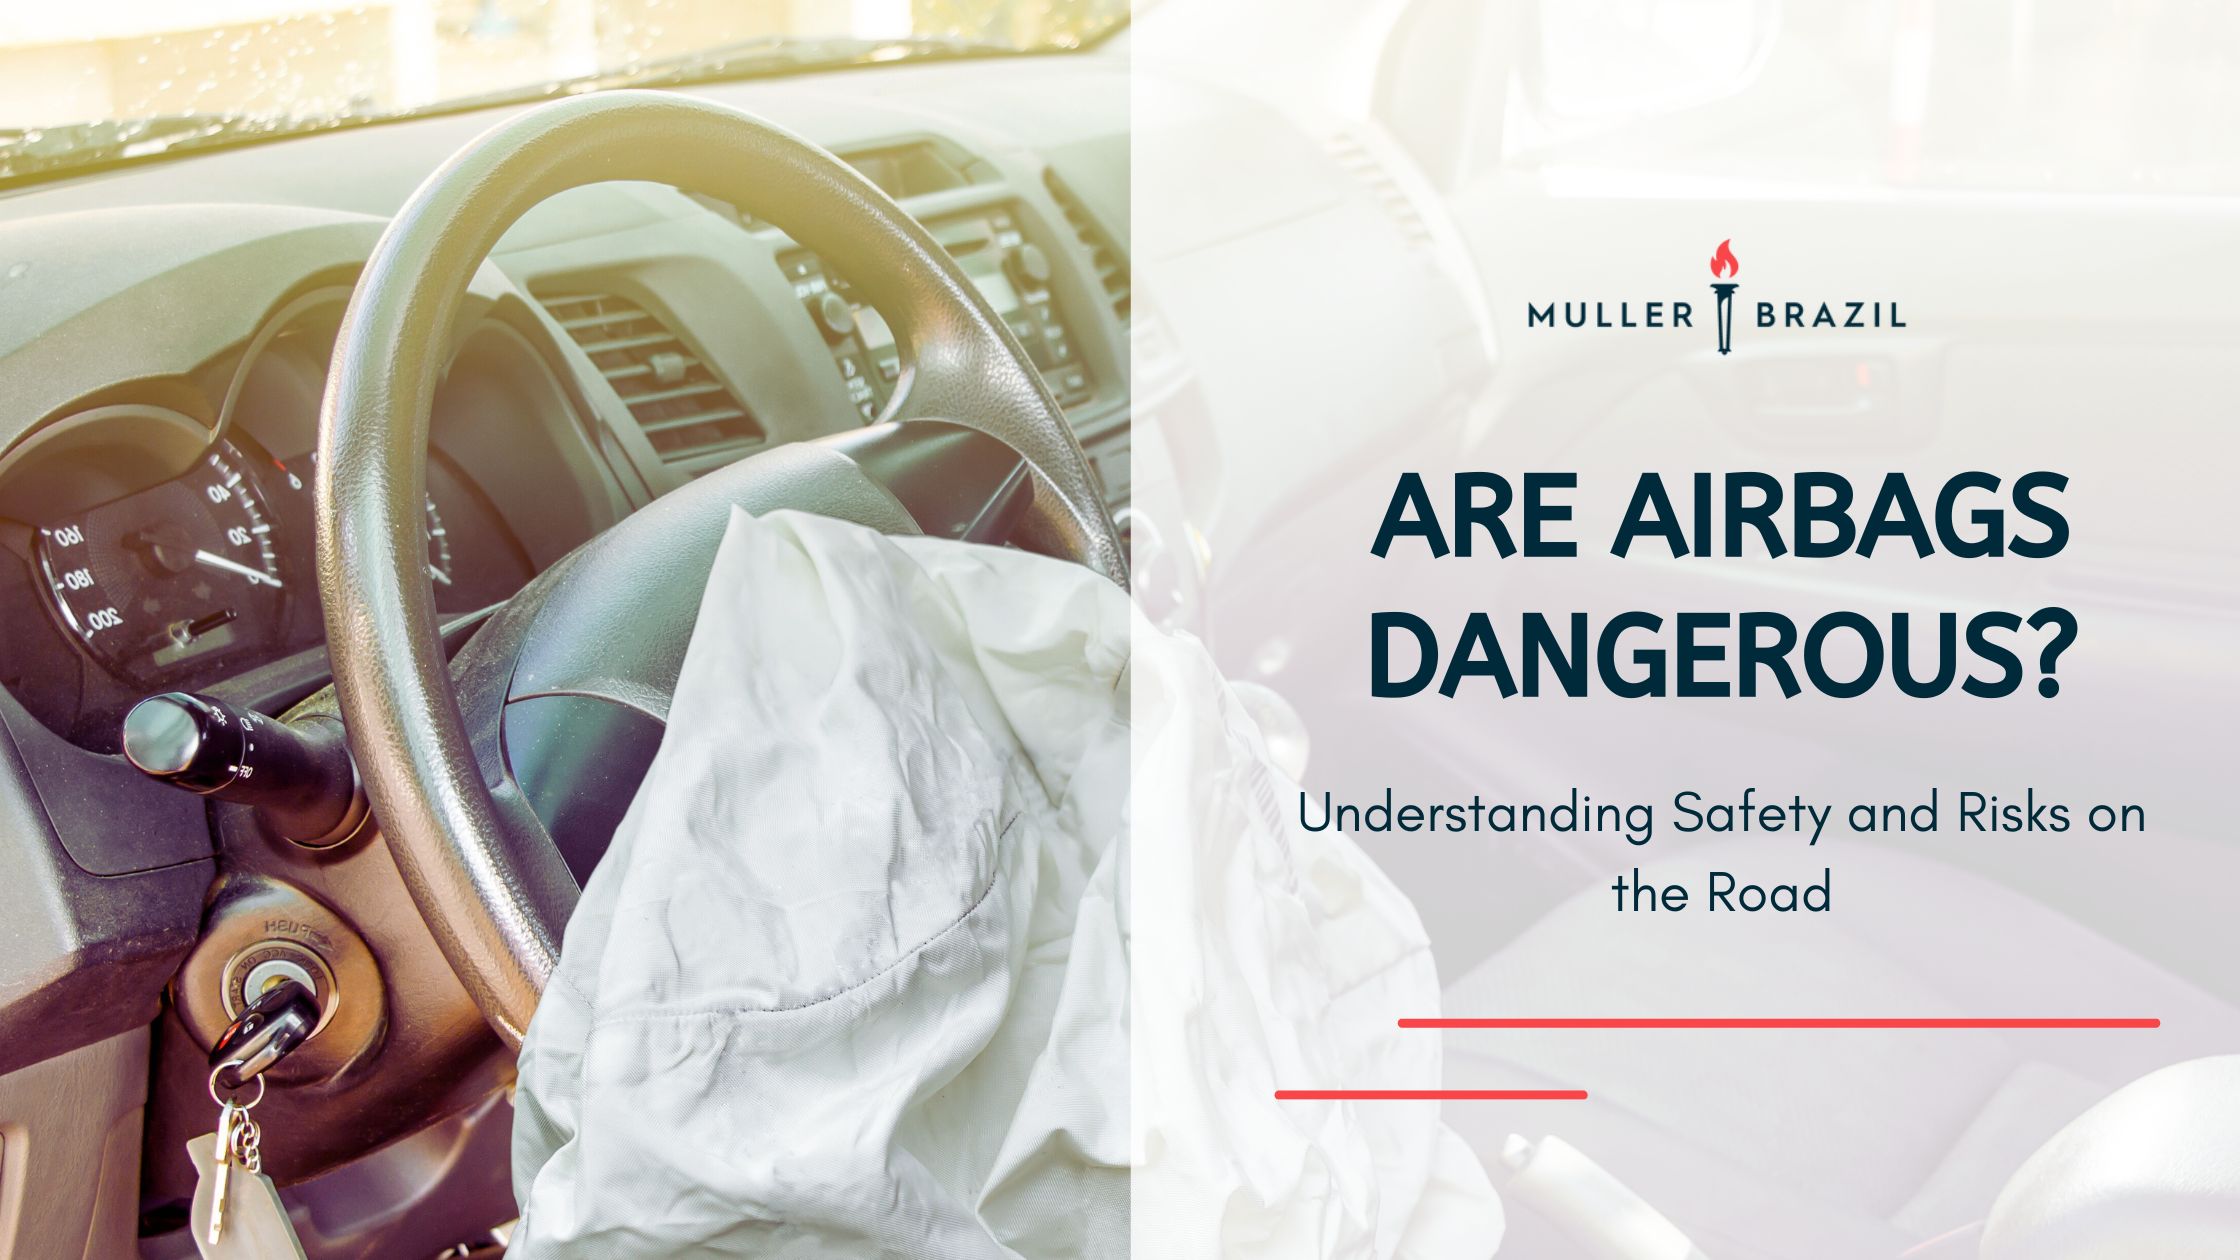 A blog post featured image with the title 'ARE AIRBAGS DANGEROUS?' prominently displayed over an image of a deployed airbag in a car's interior. The text is part of a clear, professional design including the 'Muller Brazil' logo, indicating a legal perspective on the safety and risks associated with airbags on the road.